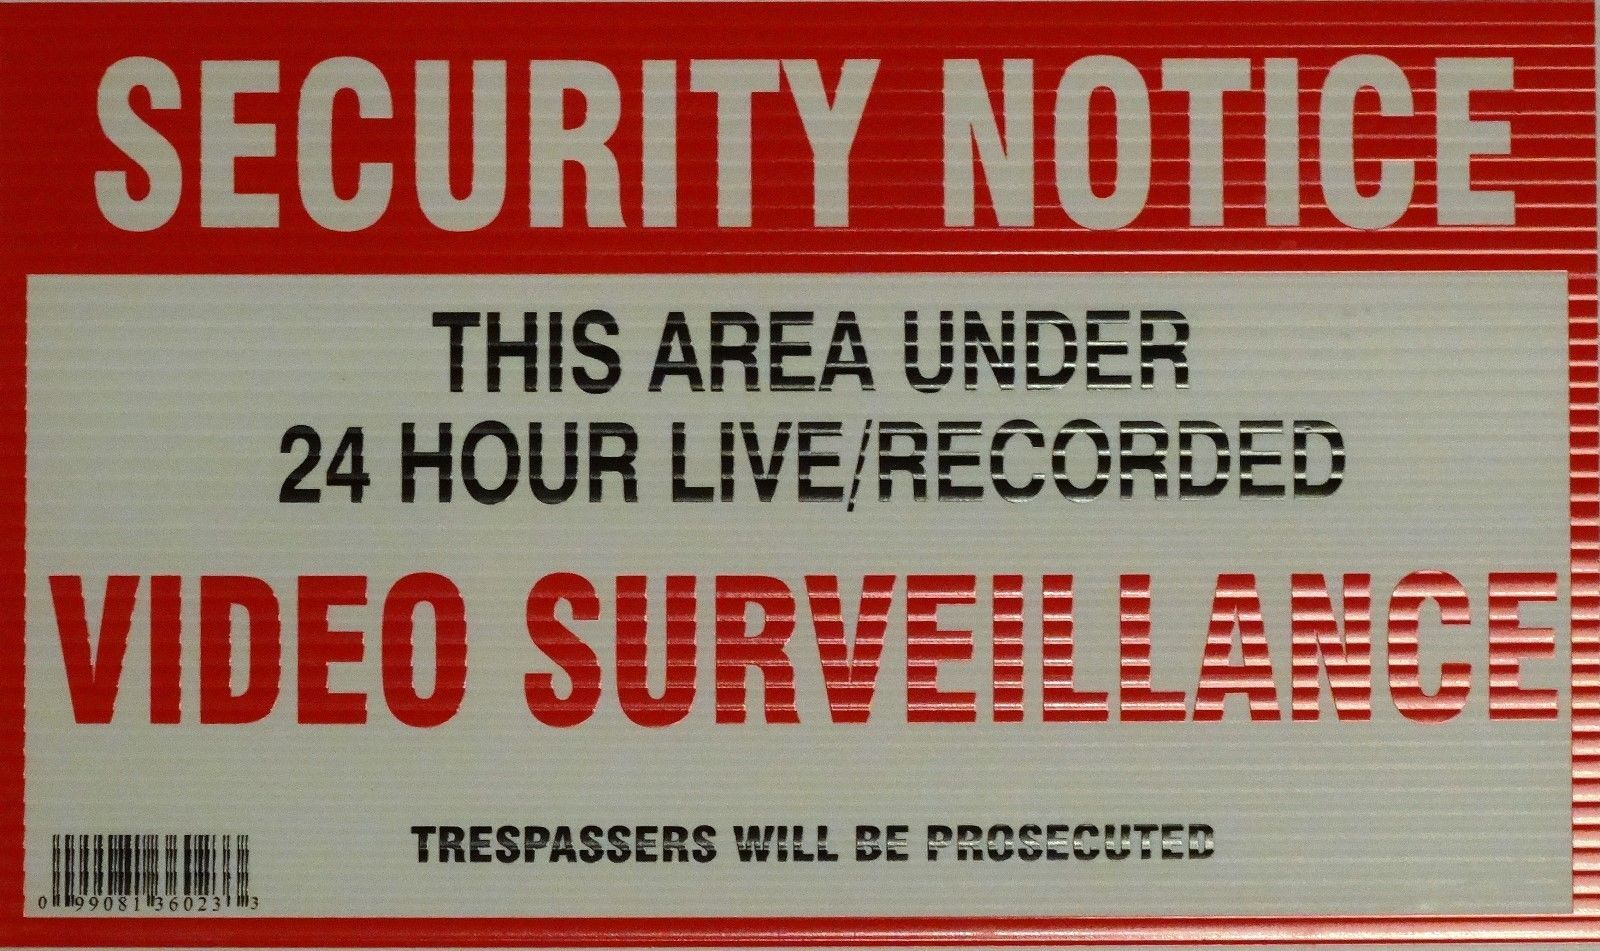 Primary image for Home Monitored X10 Video Surveillance Security Warning Yard Sign notice 11x7